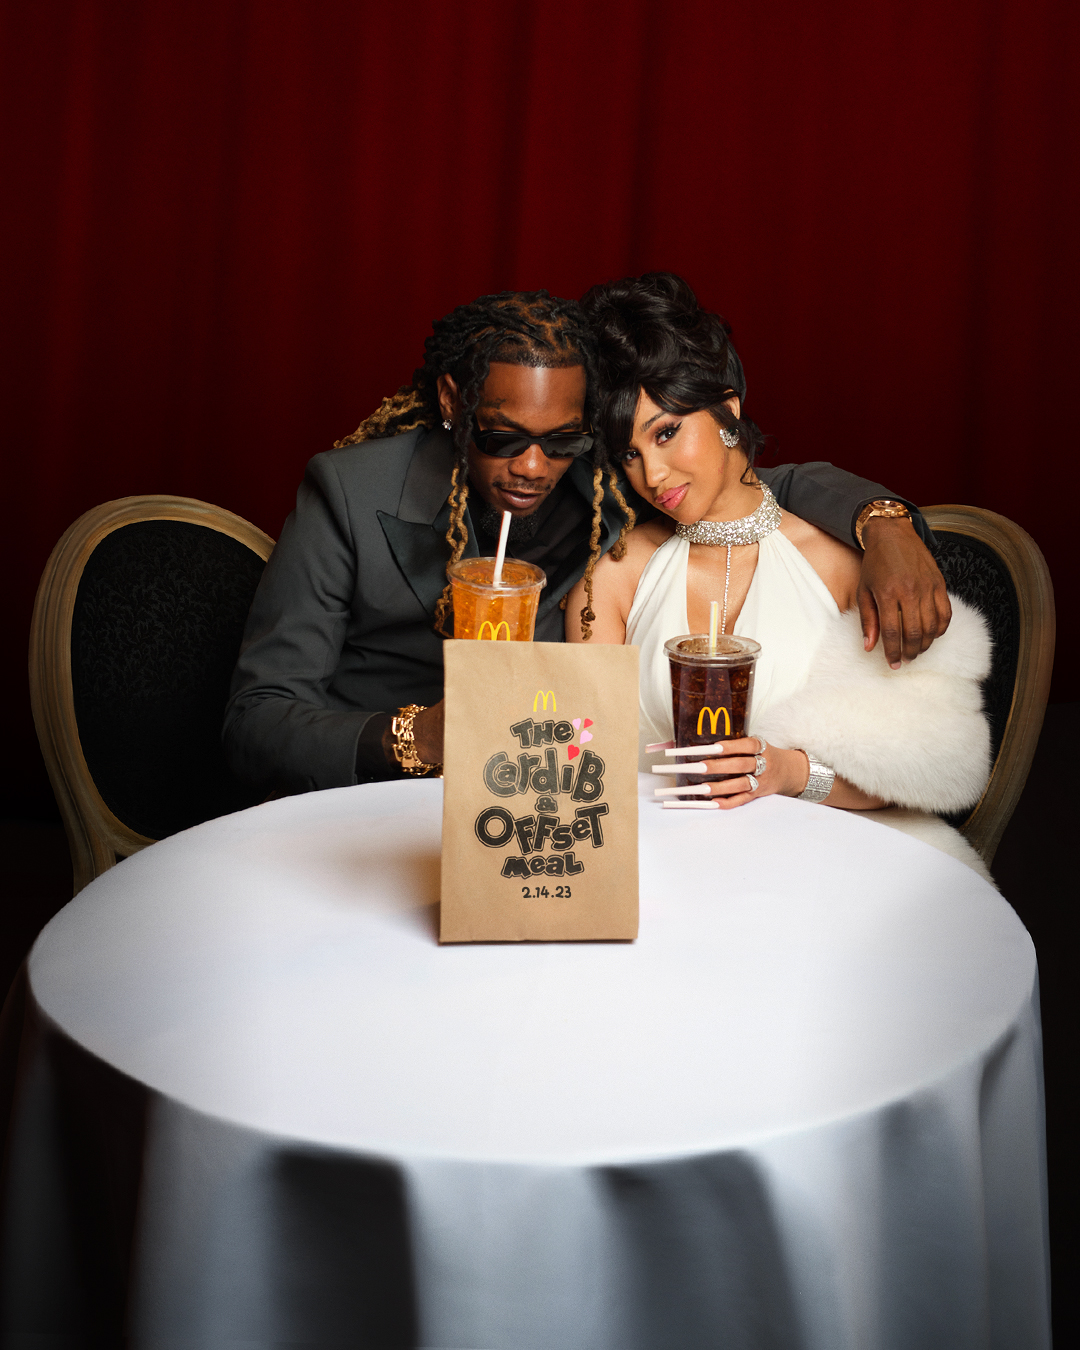 McDonald’s Releases Cardi B & Offset Duo Meal 2/14